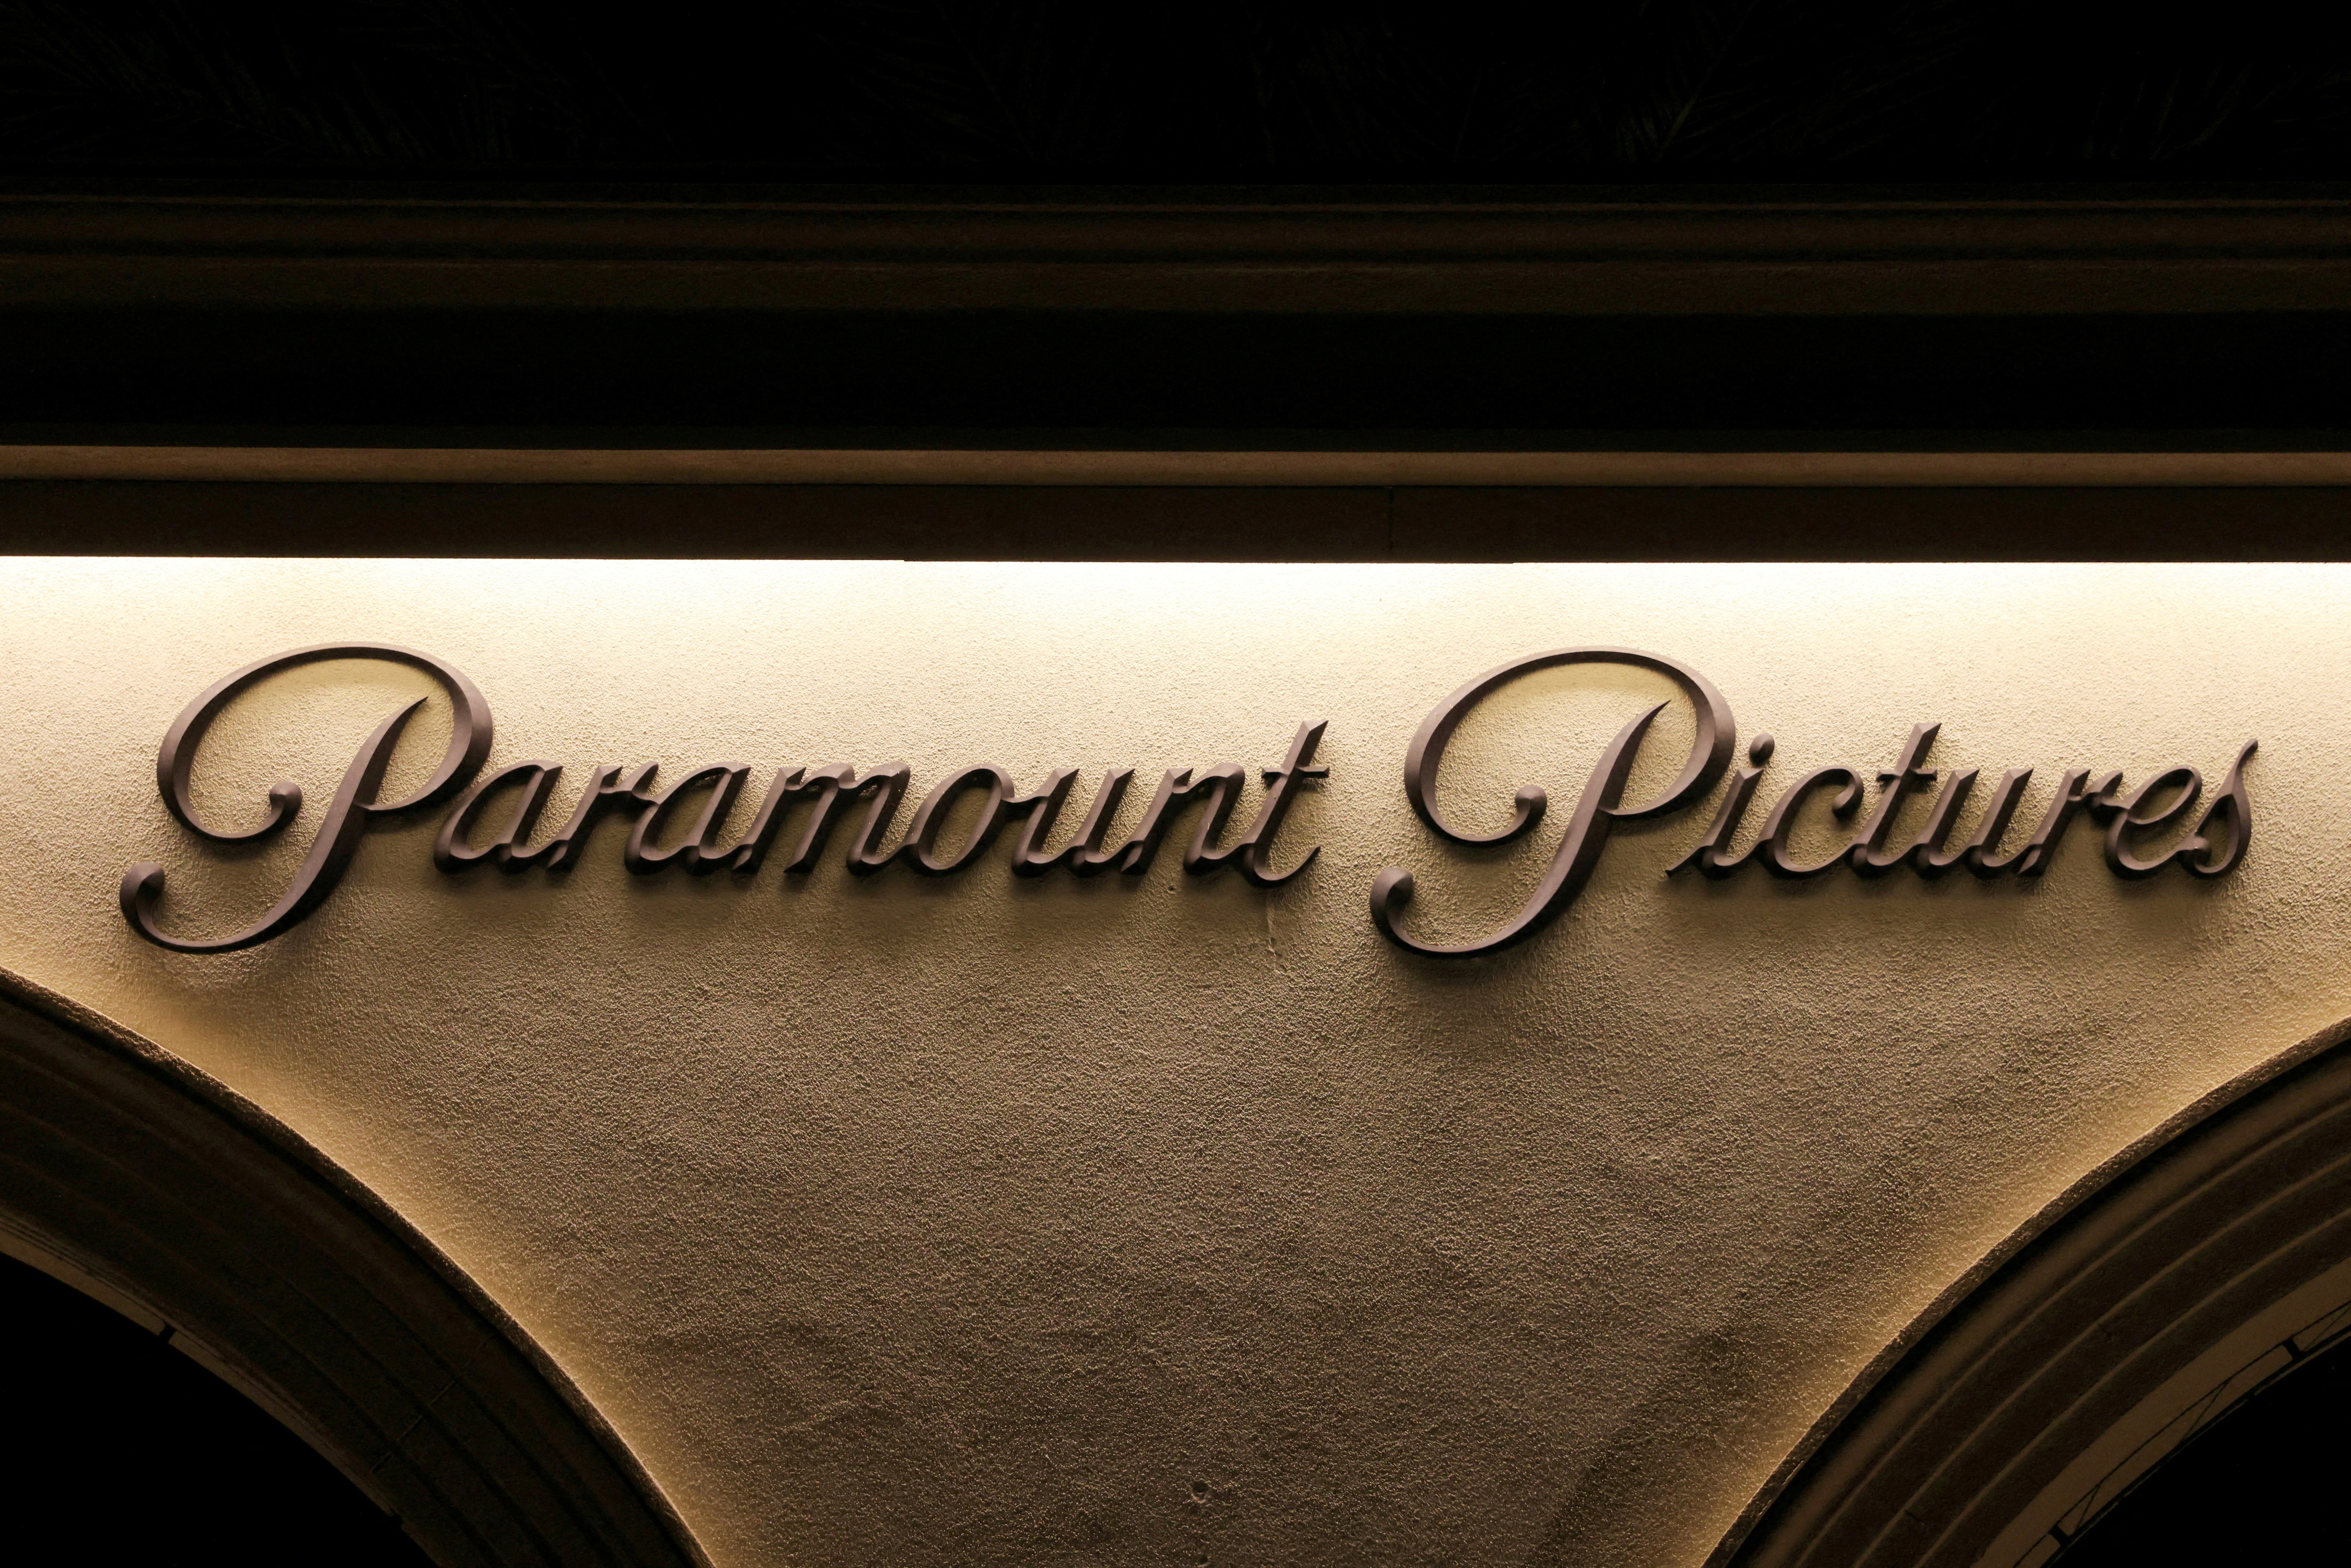 Logo of Paramount Pictures